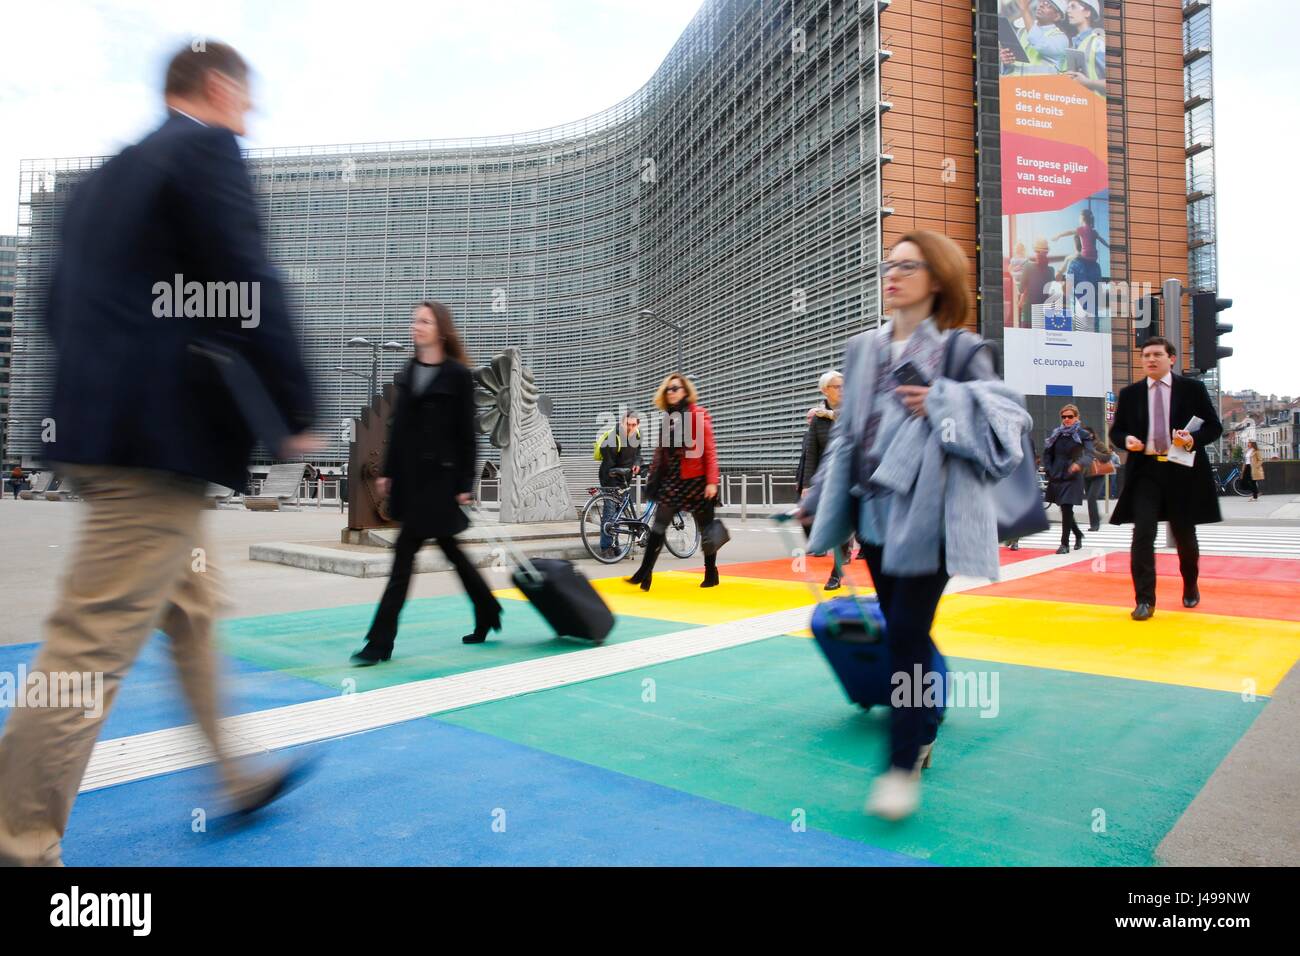 Brussels, Belgium. 11th May, 2017. People walk on pedestrian crossing in the colours of the rainbow flag in front of European Commision building in Brussels, Belgium, May 11, 2017. Credit: Ye Pingfan/Xinhua/Alamy Live News Stock Photo